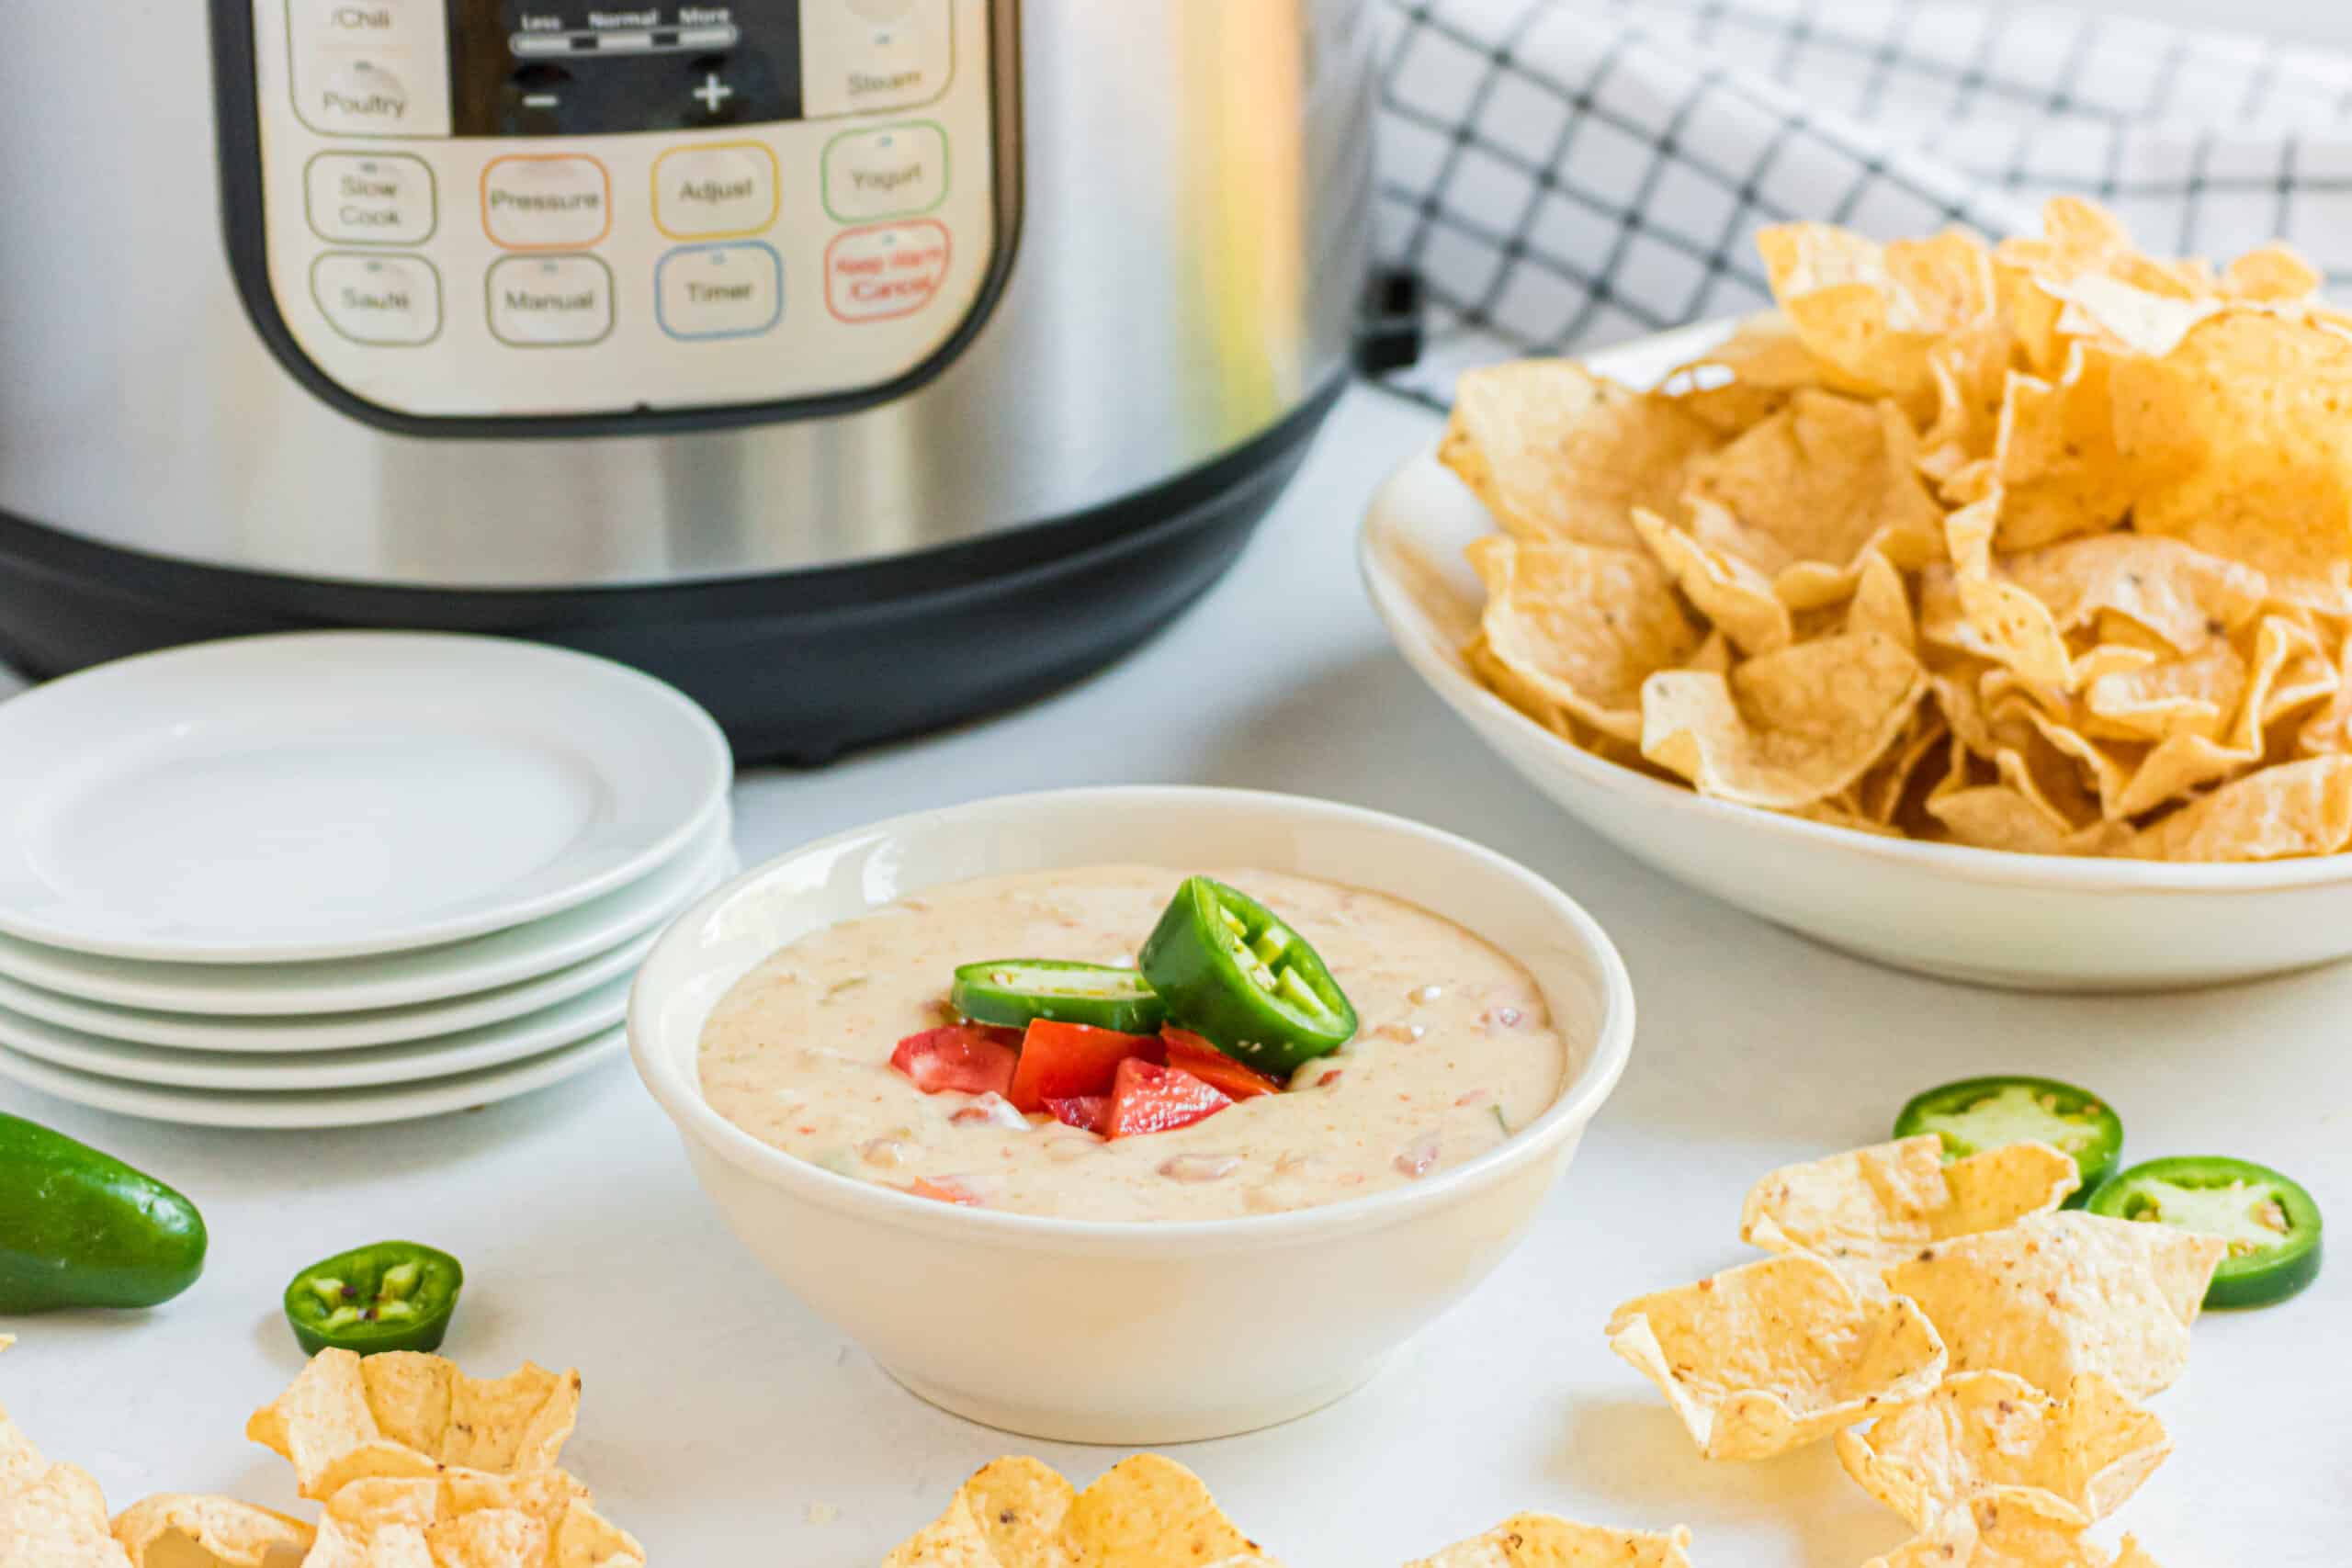 https://www.shugarysweets.com/wp-content/uploads/2020/06/instant-pot-queso-25-scaled.jpg